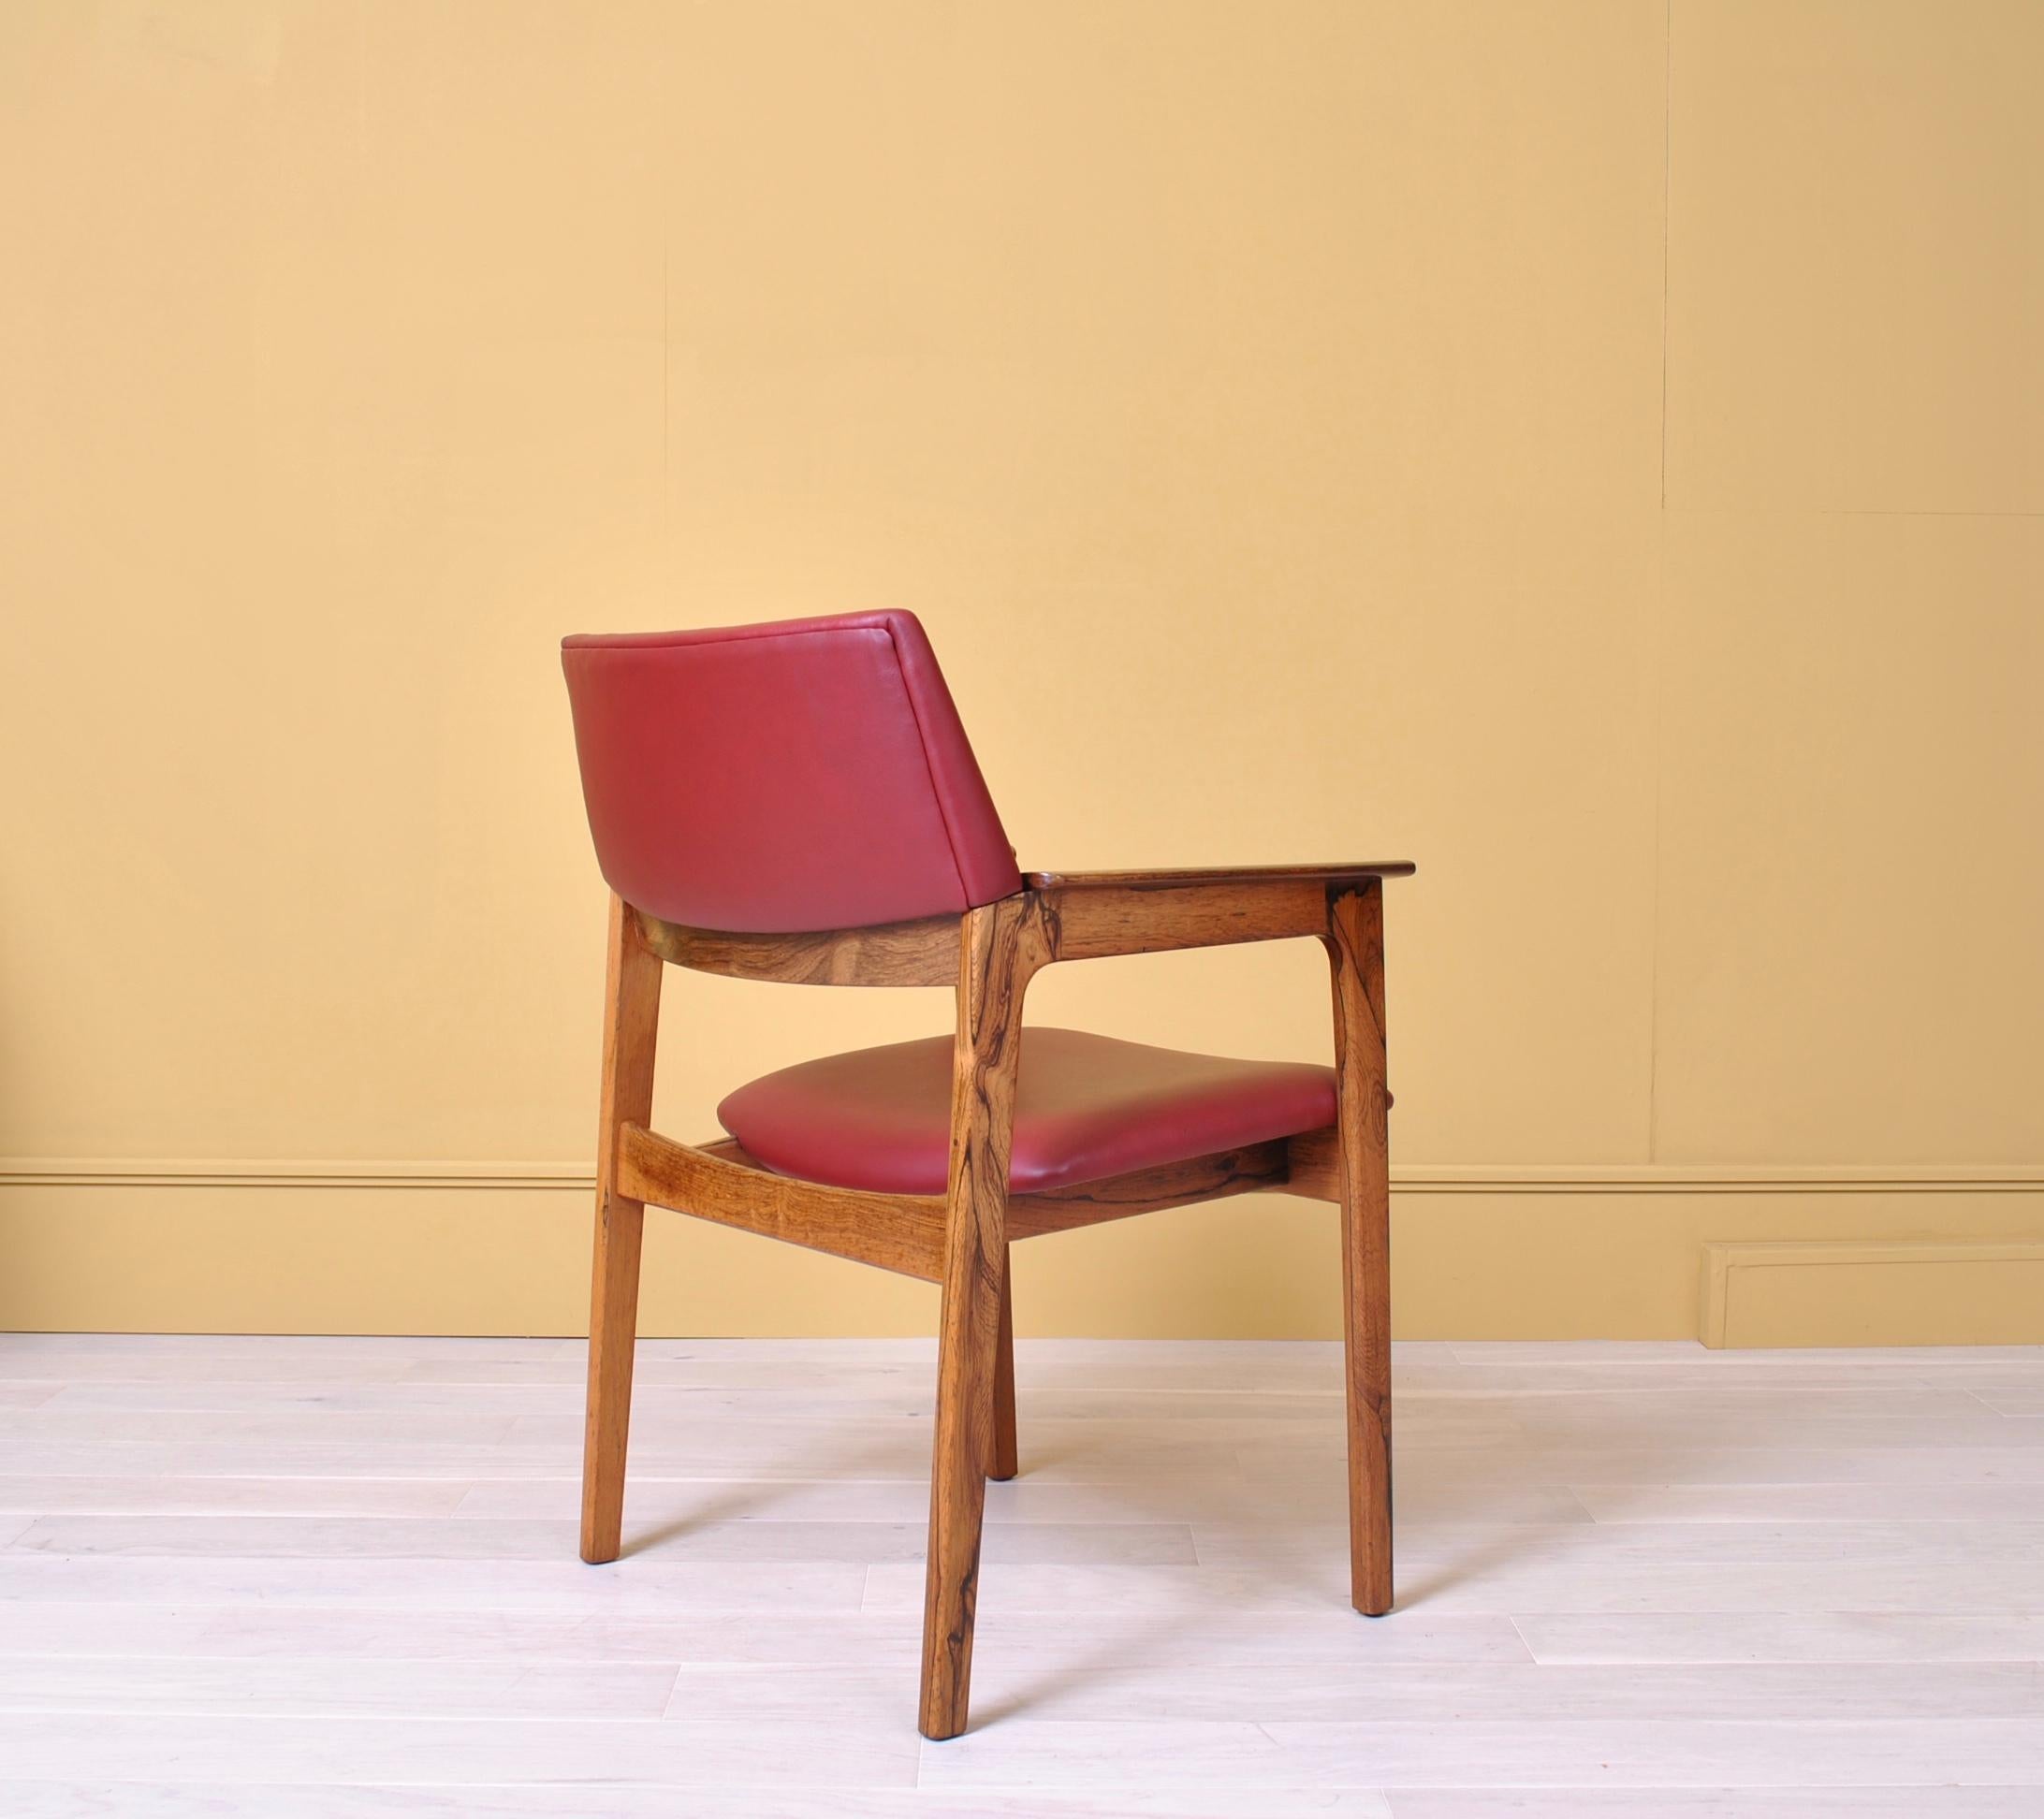 20th Century Danish Midcentury Leather Chair, Fully Reupholstered